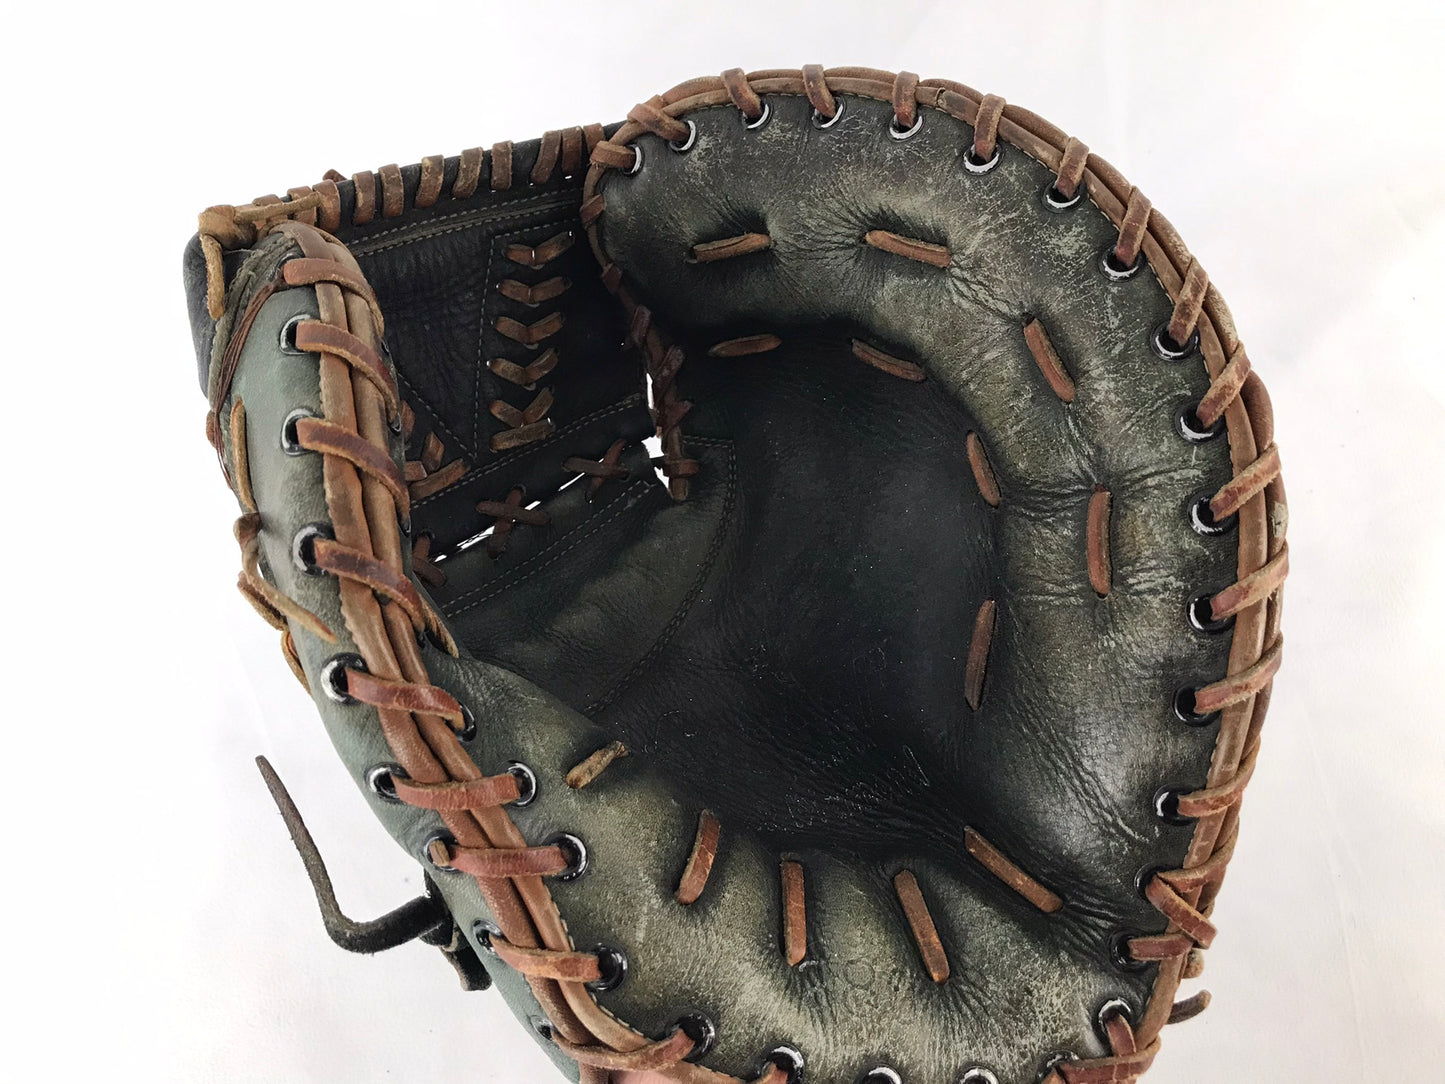 Baseball Glove Adult Size 12 inch First Basemen Cooper Black Diamond Vintage Green Leather Very RARE Outstanding Quality